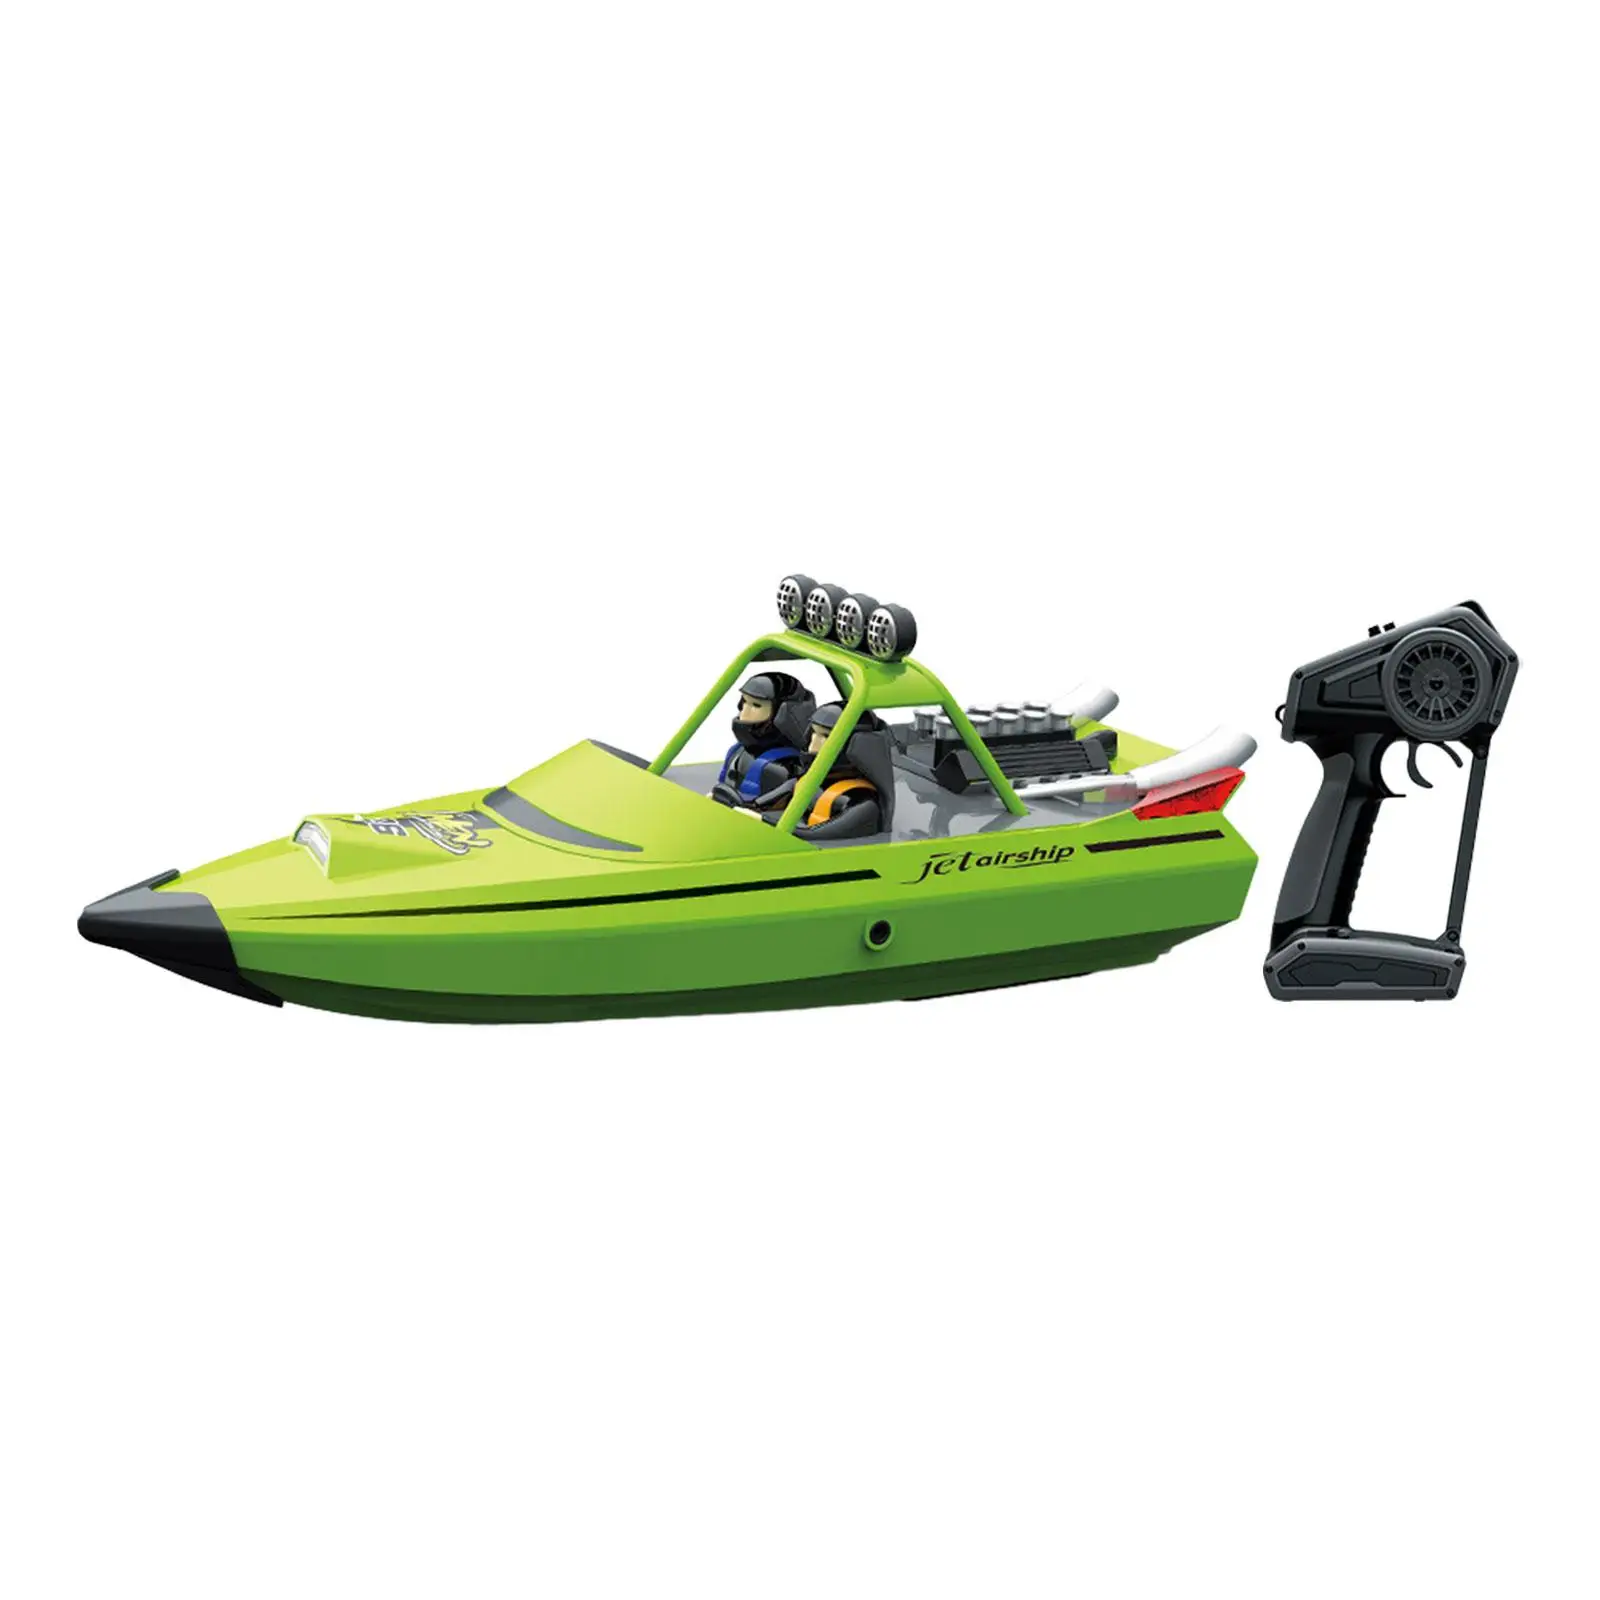 RC Boat Outdoor Radio Controlled Watercraft Self Righting Racing Boat for Kids Boys Girls Teens Pools and Lakes Birthday Gifts